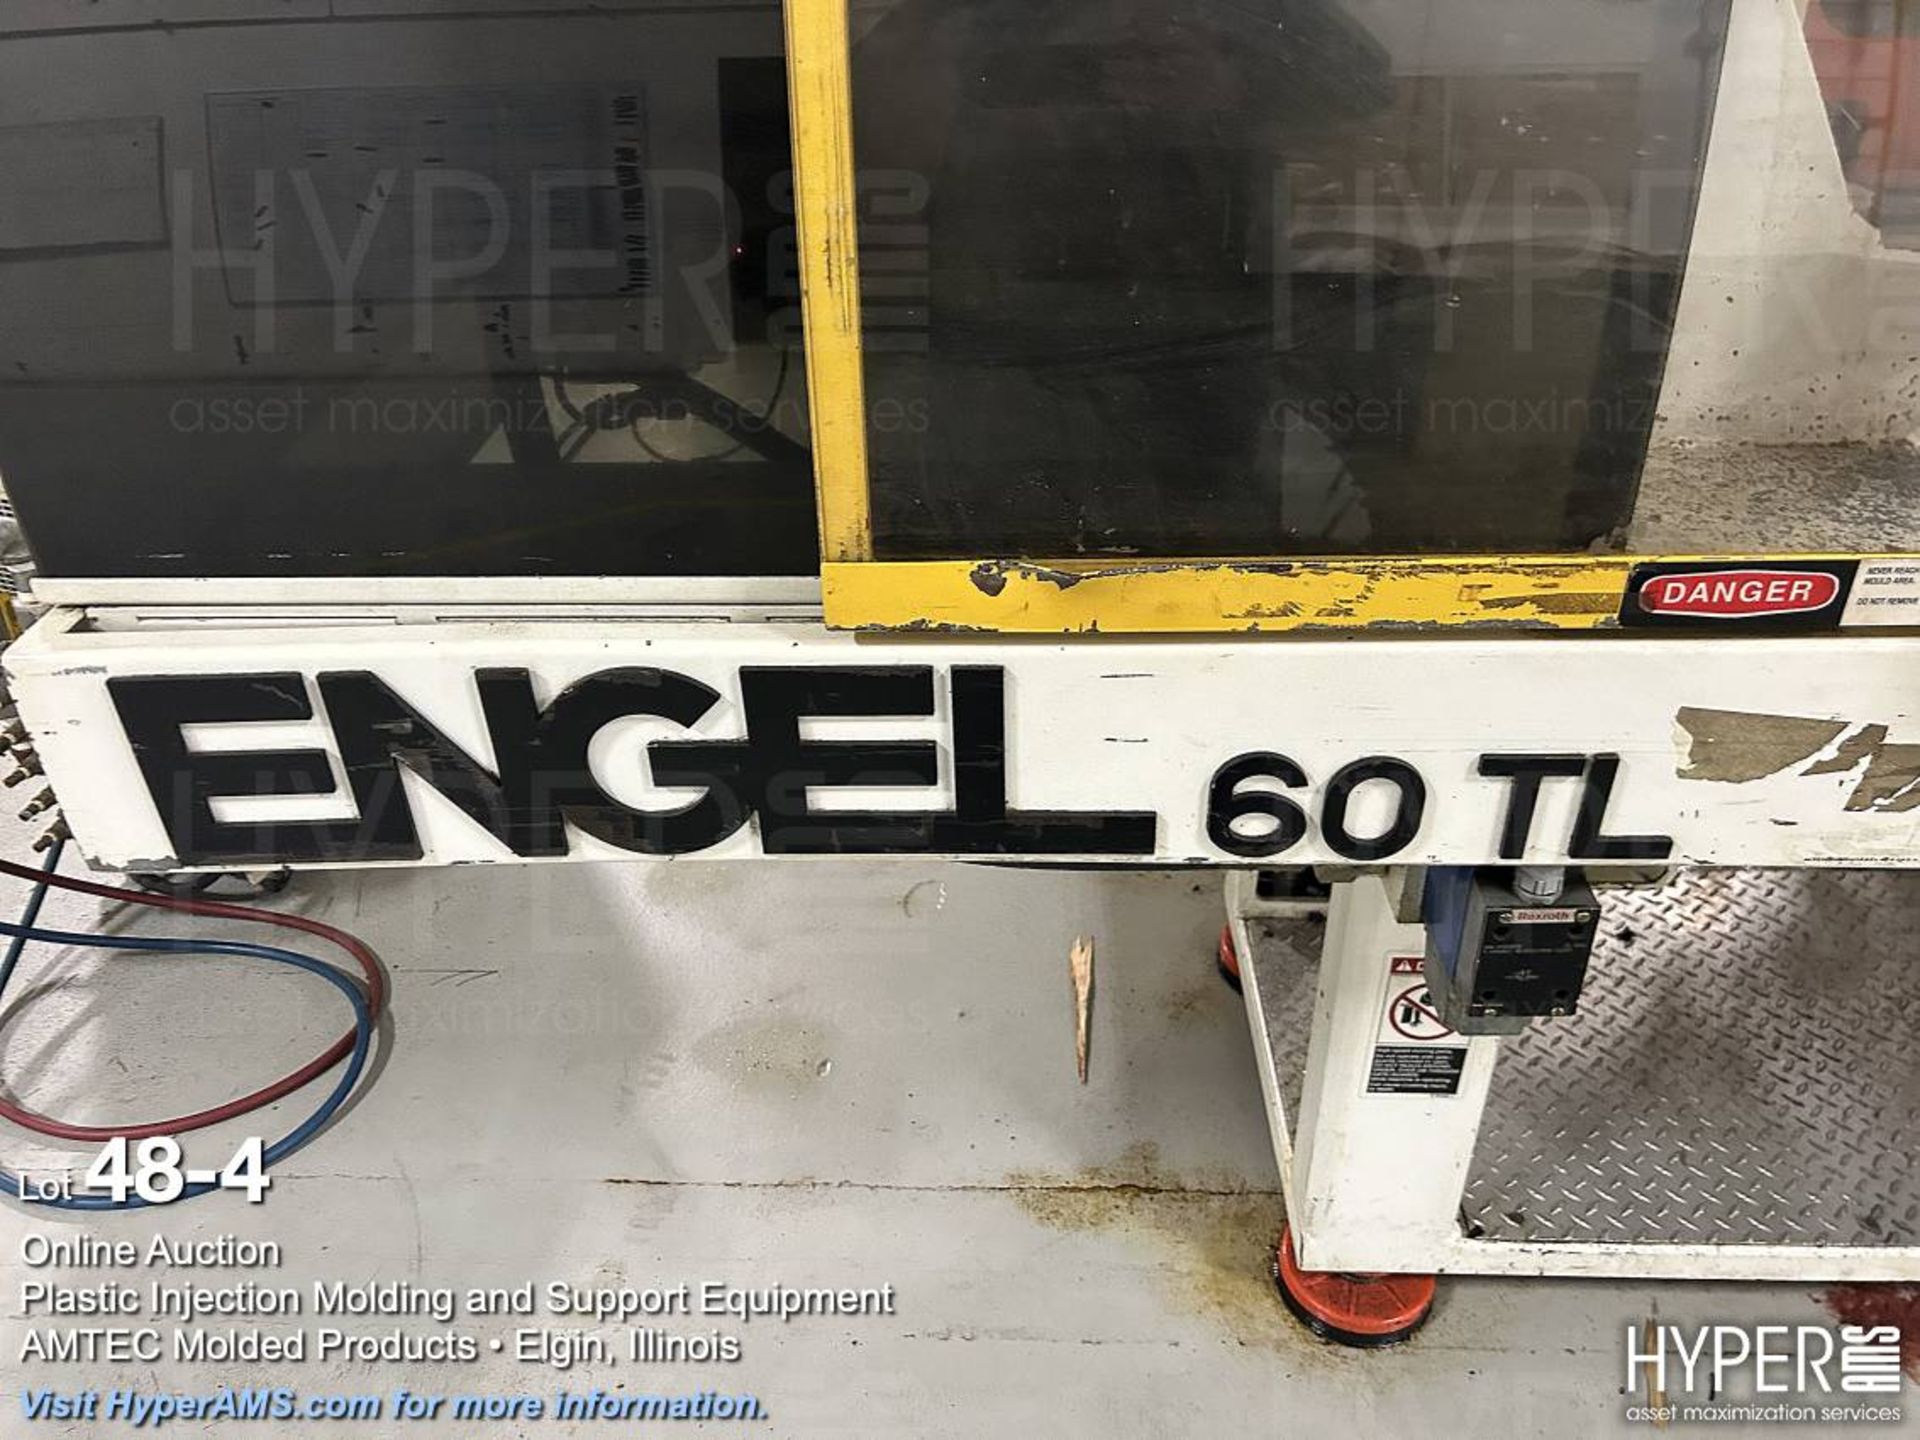 Engel ES200/60TL toggle clamp plastic injection molding machine - Image 4 of 16